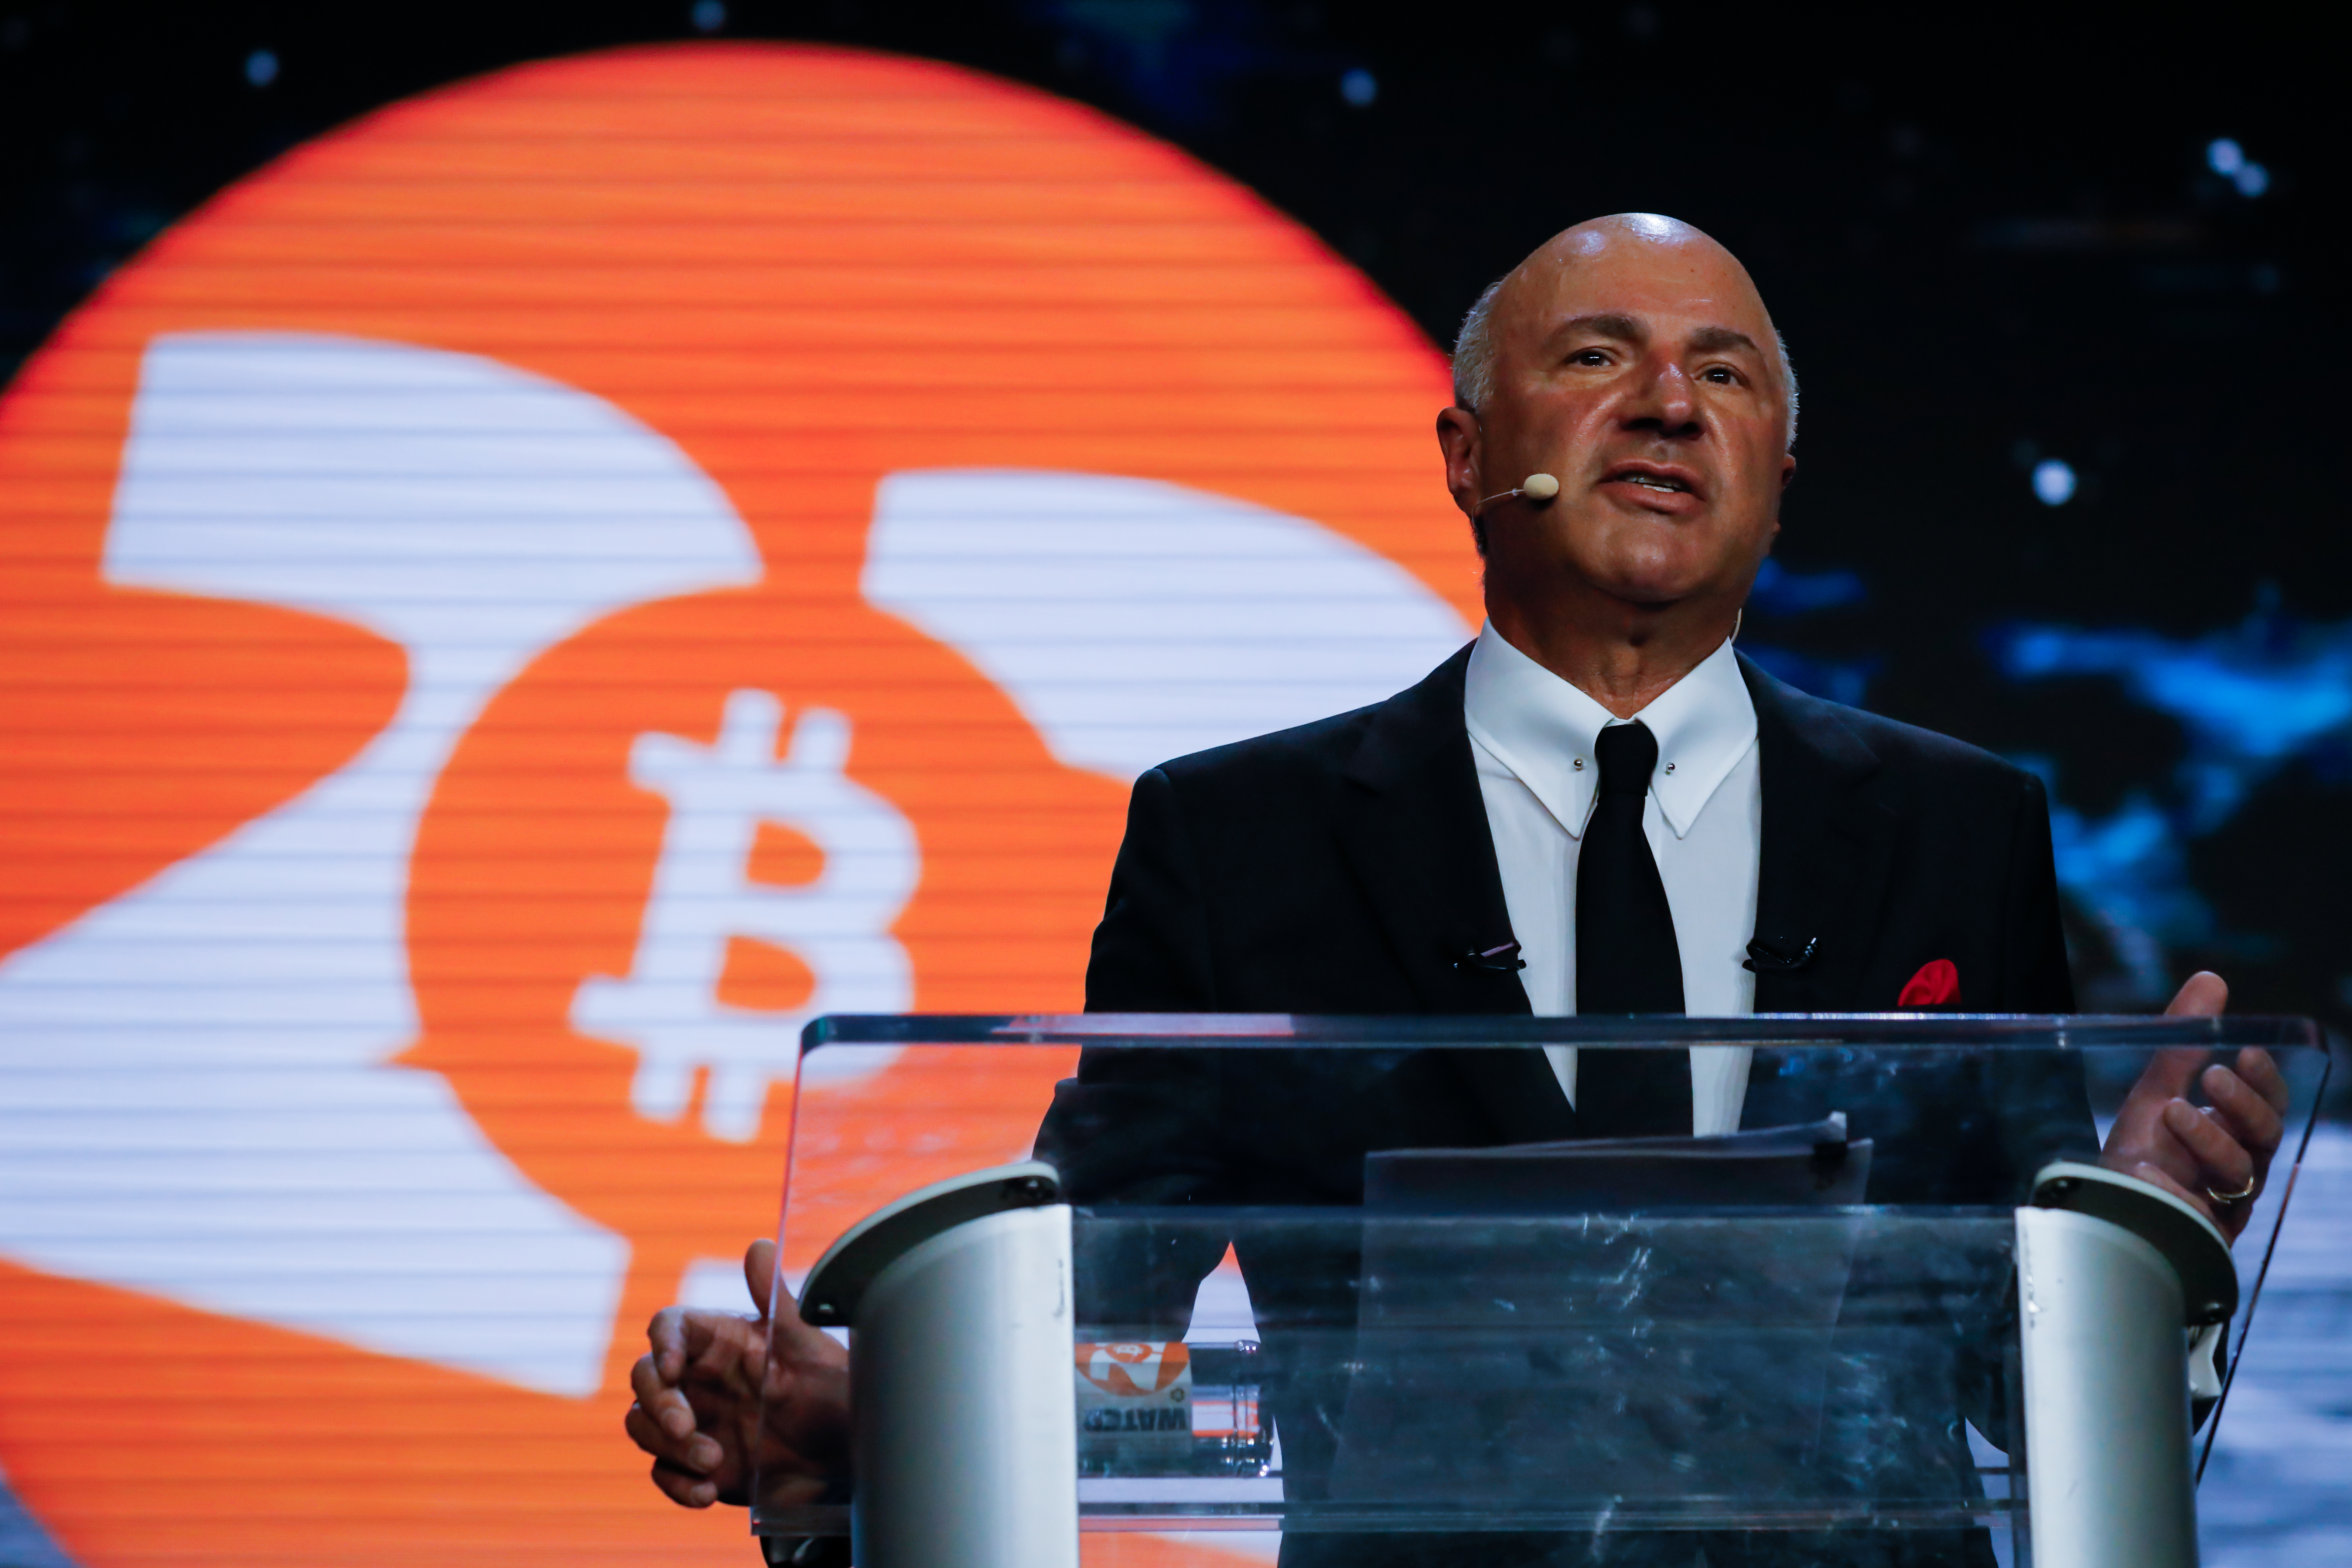 'Shark Tank' investor Kevin O’Leary hated Bitcoin for years. Now he thinks it’s going to 'save the world.'